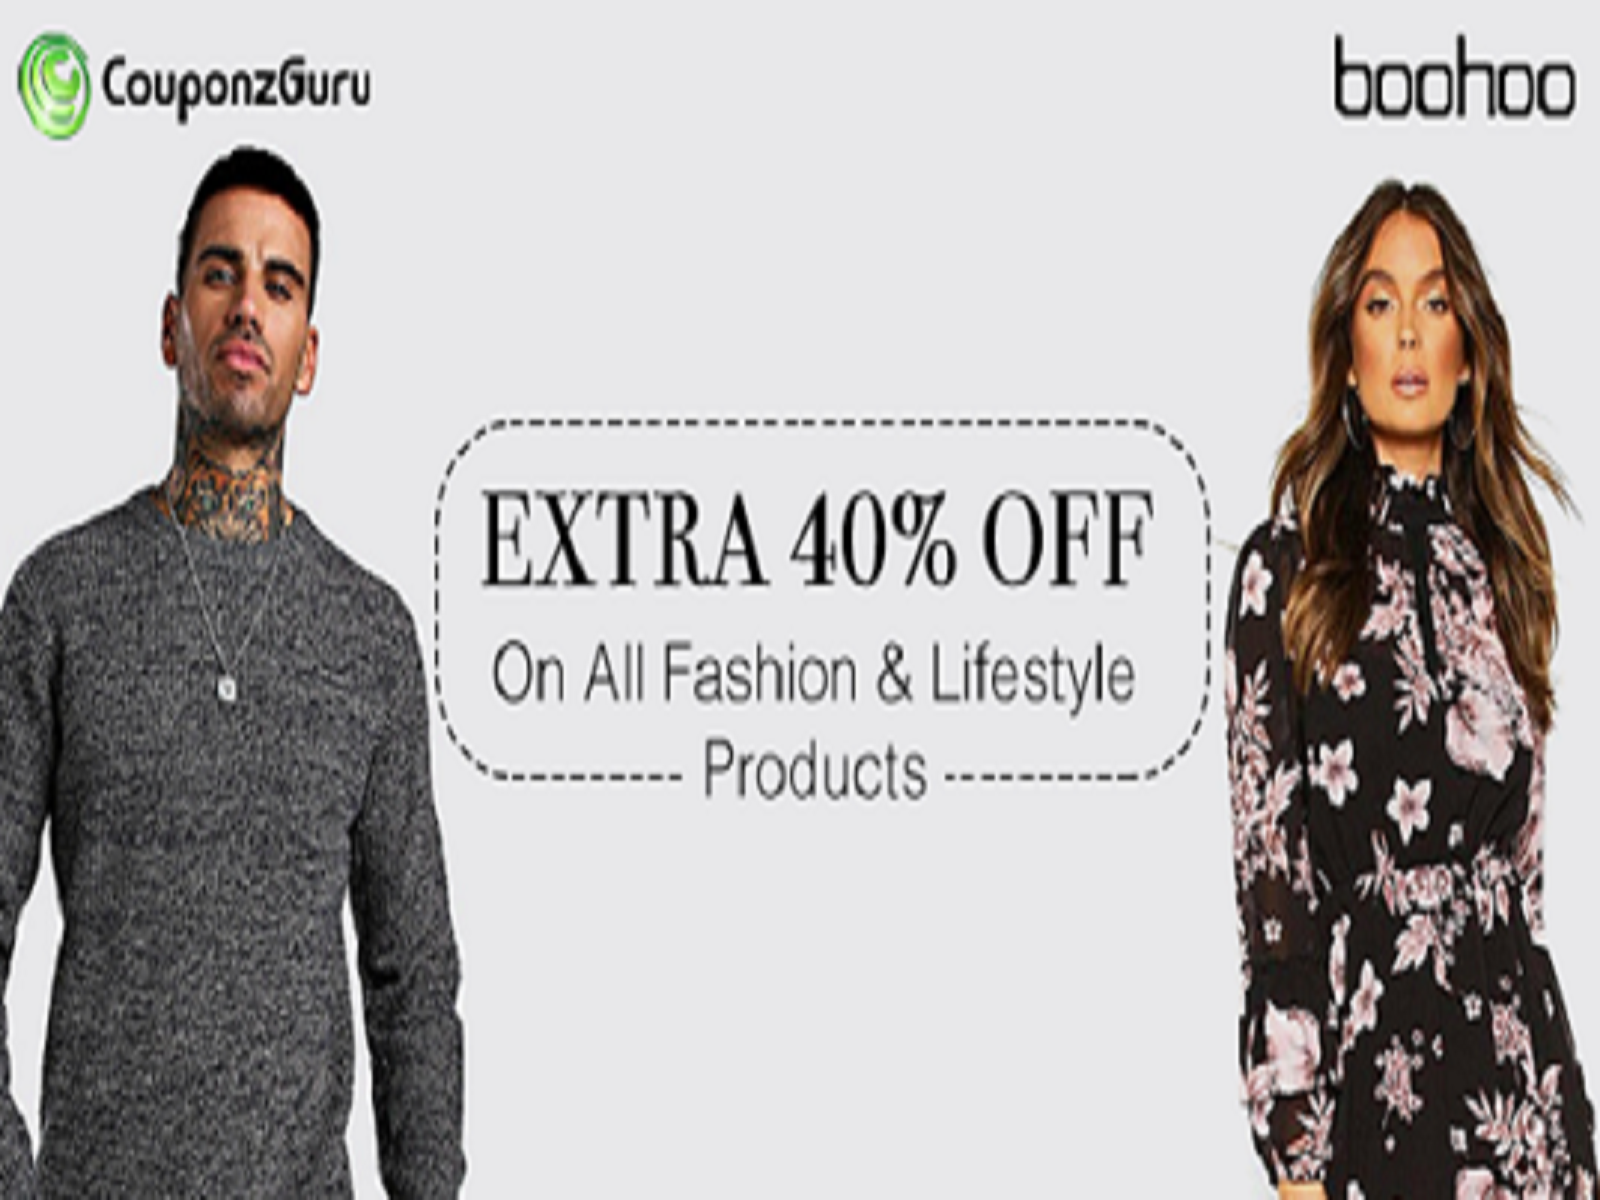 boohoo-coupon-codes-promotional-offers-by-joseph-on-dribbble